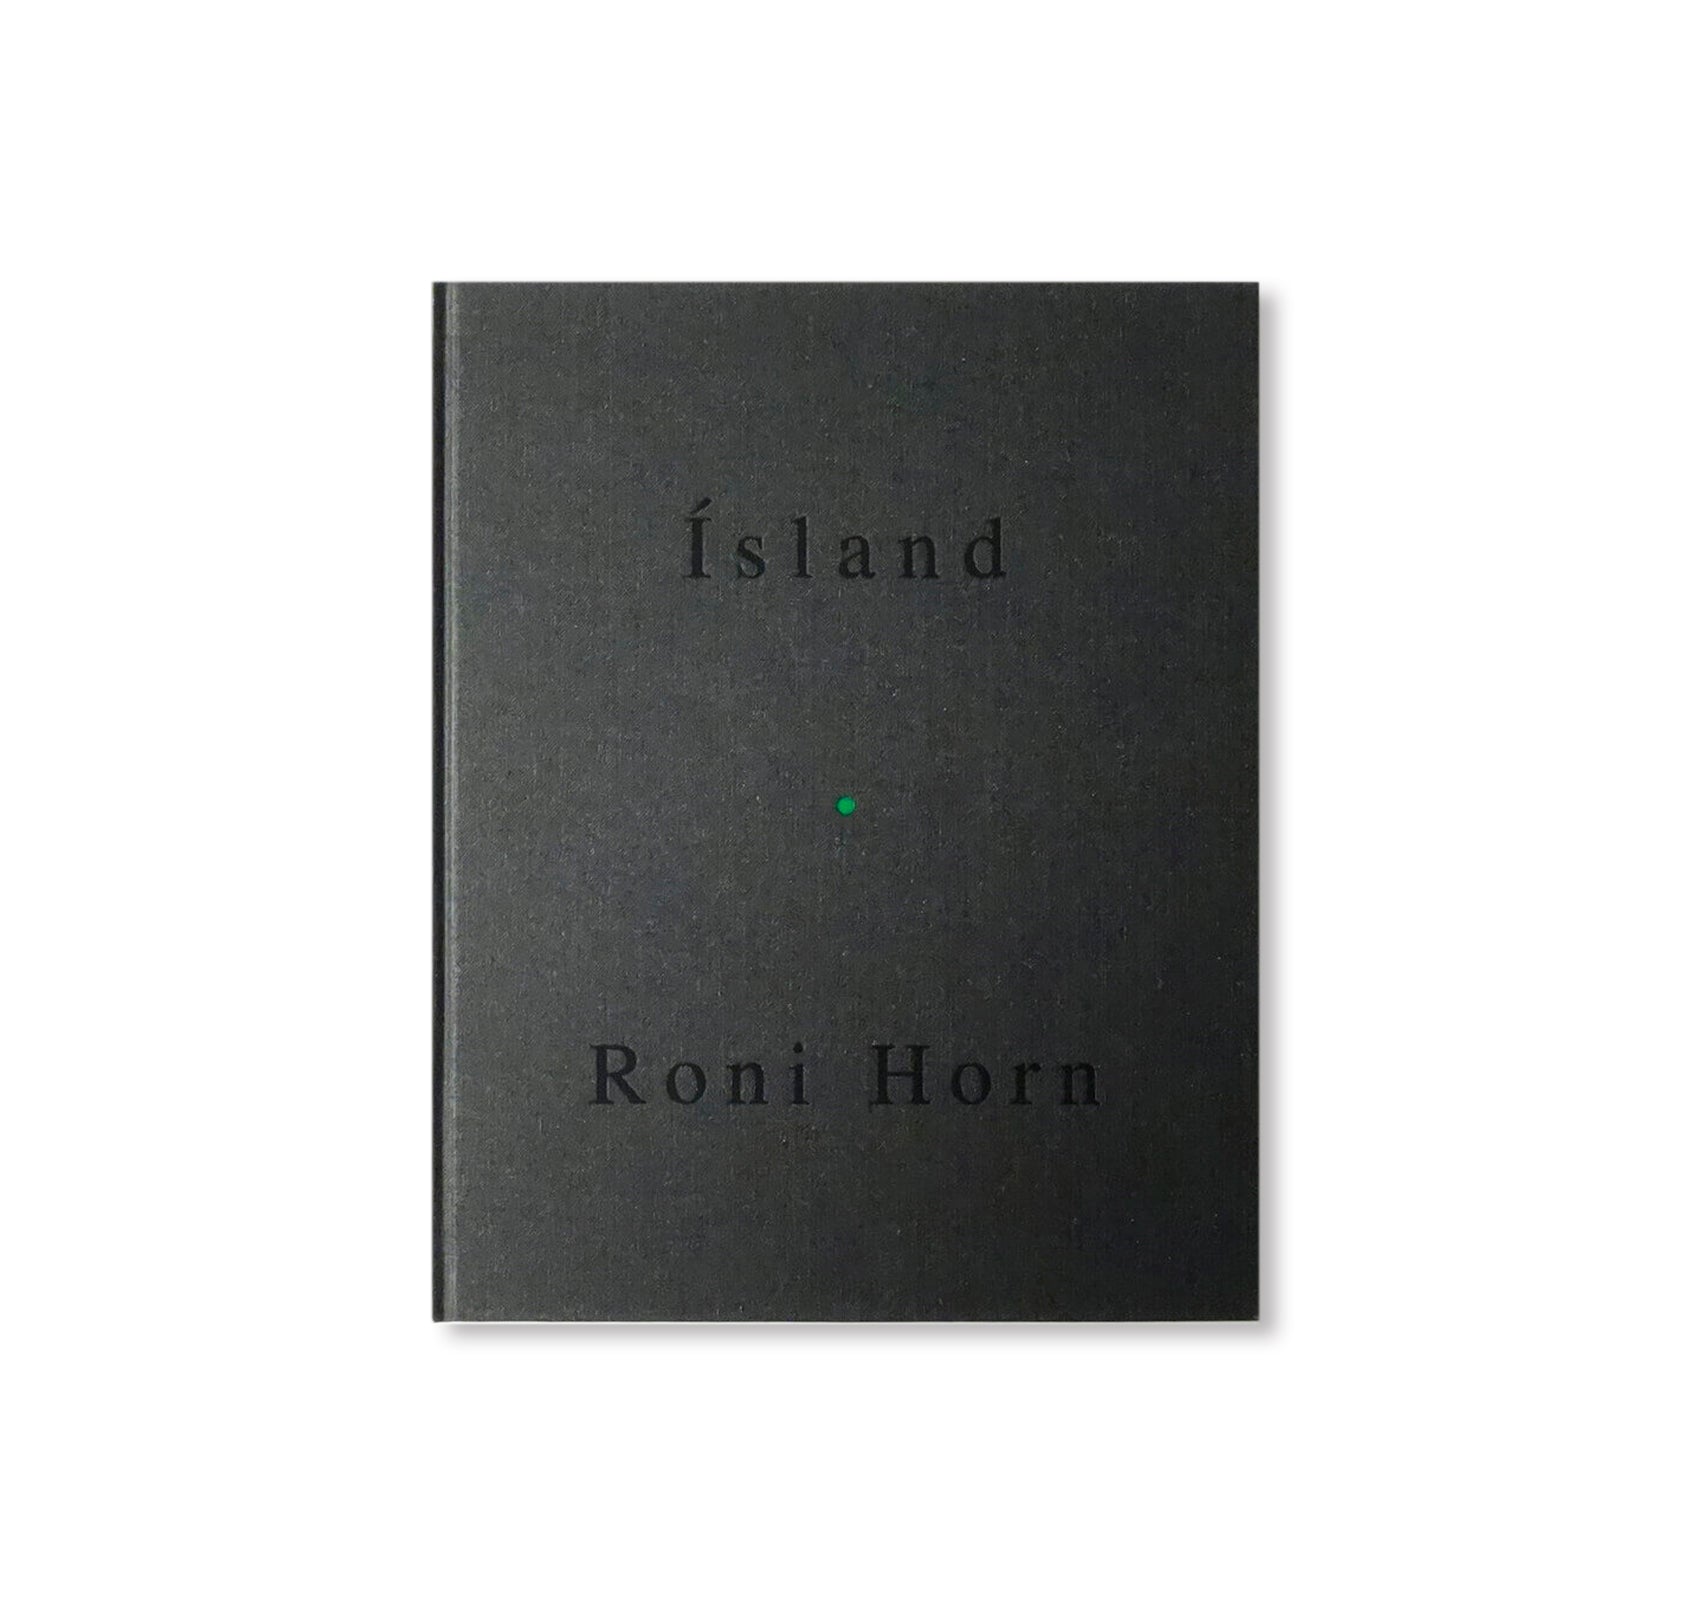 ISLAND: TO PLACE - VERNE'S JOURNEY by Roni Horn